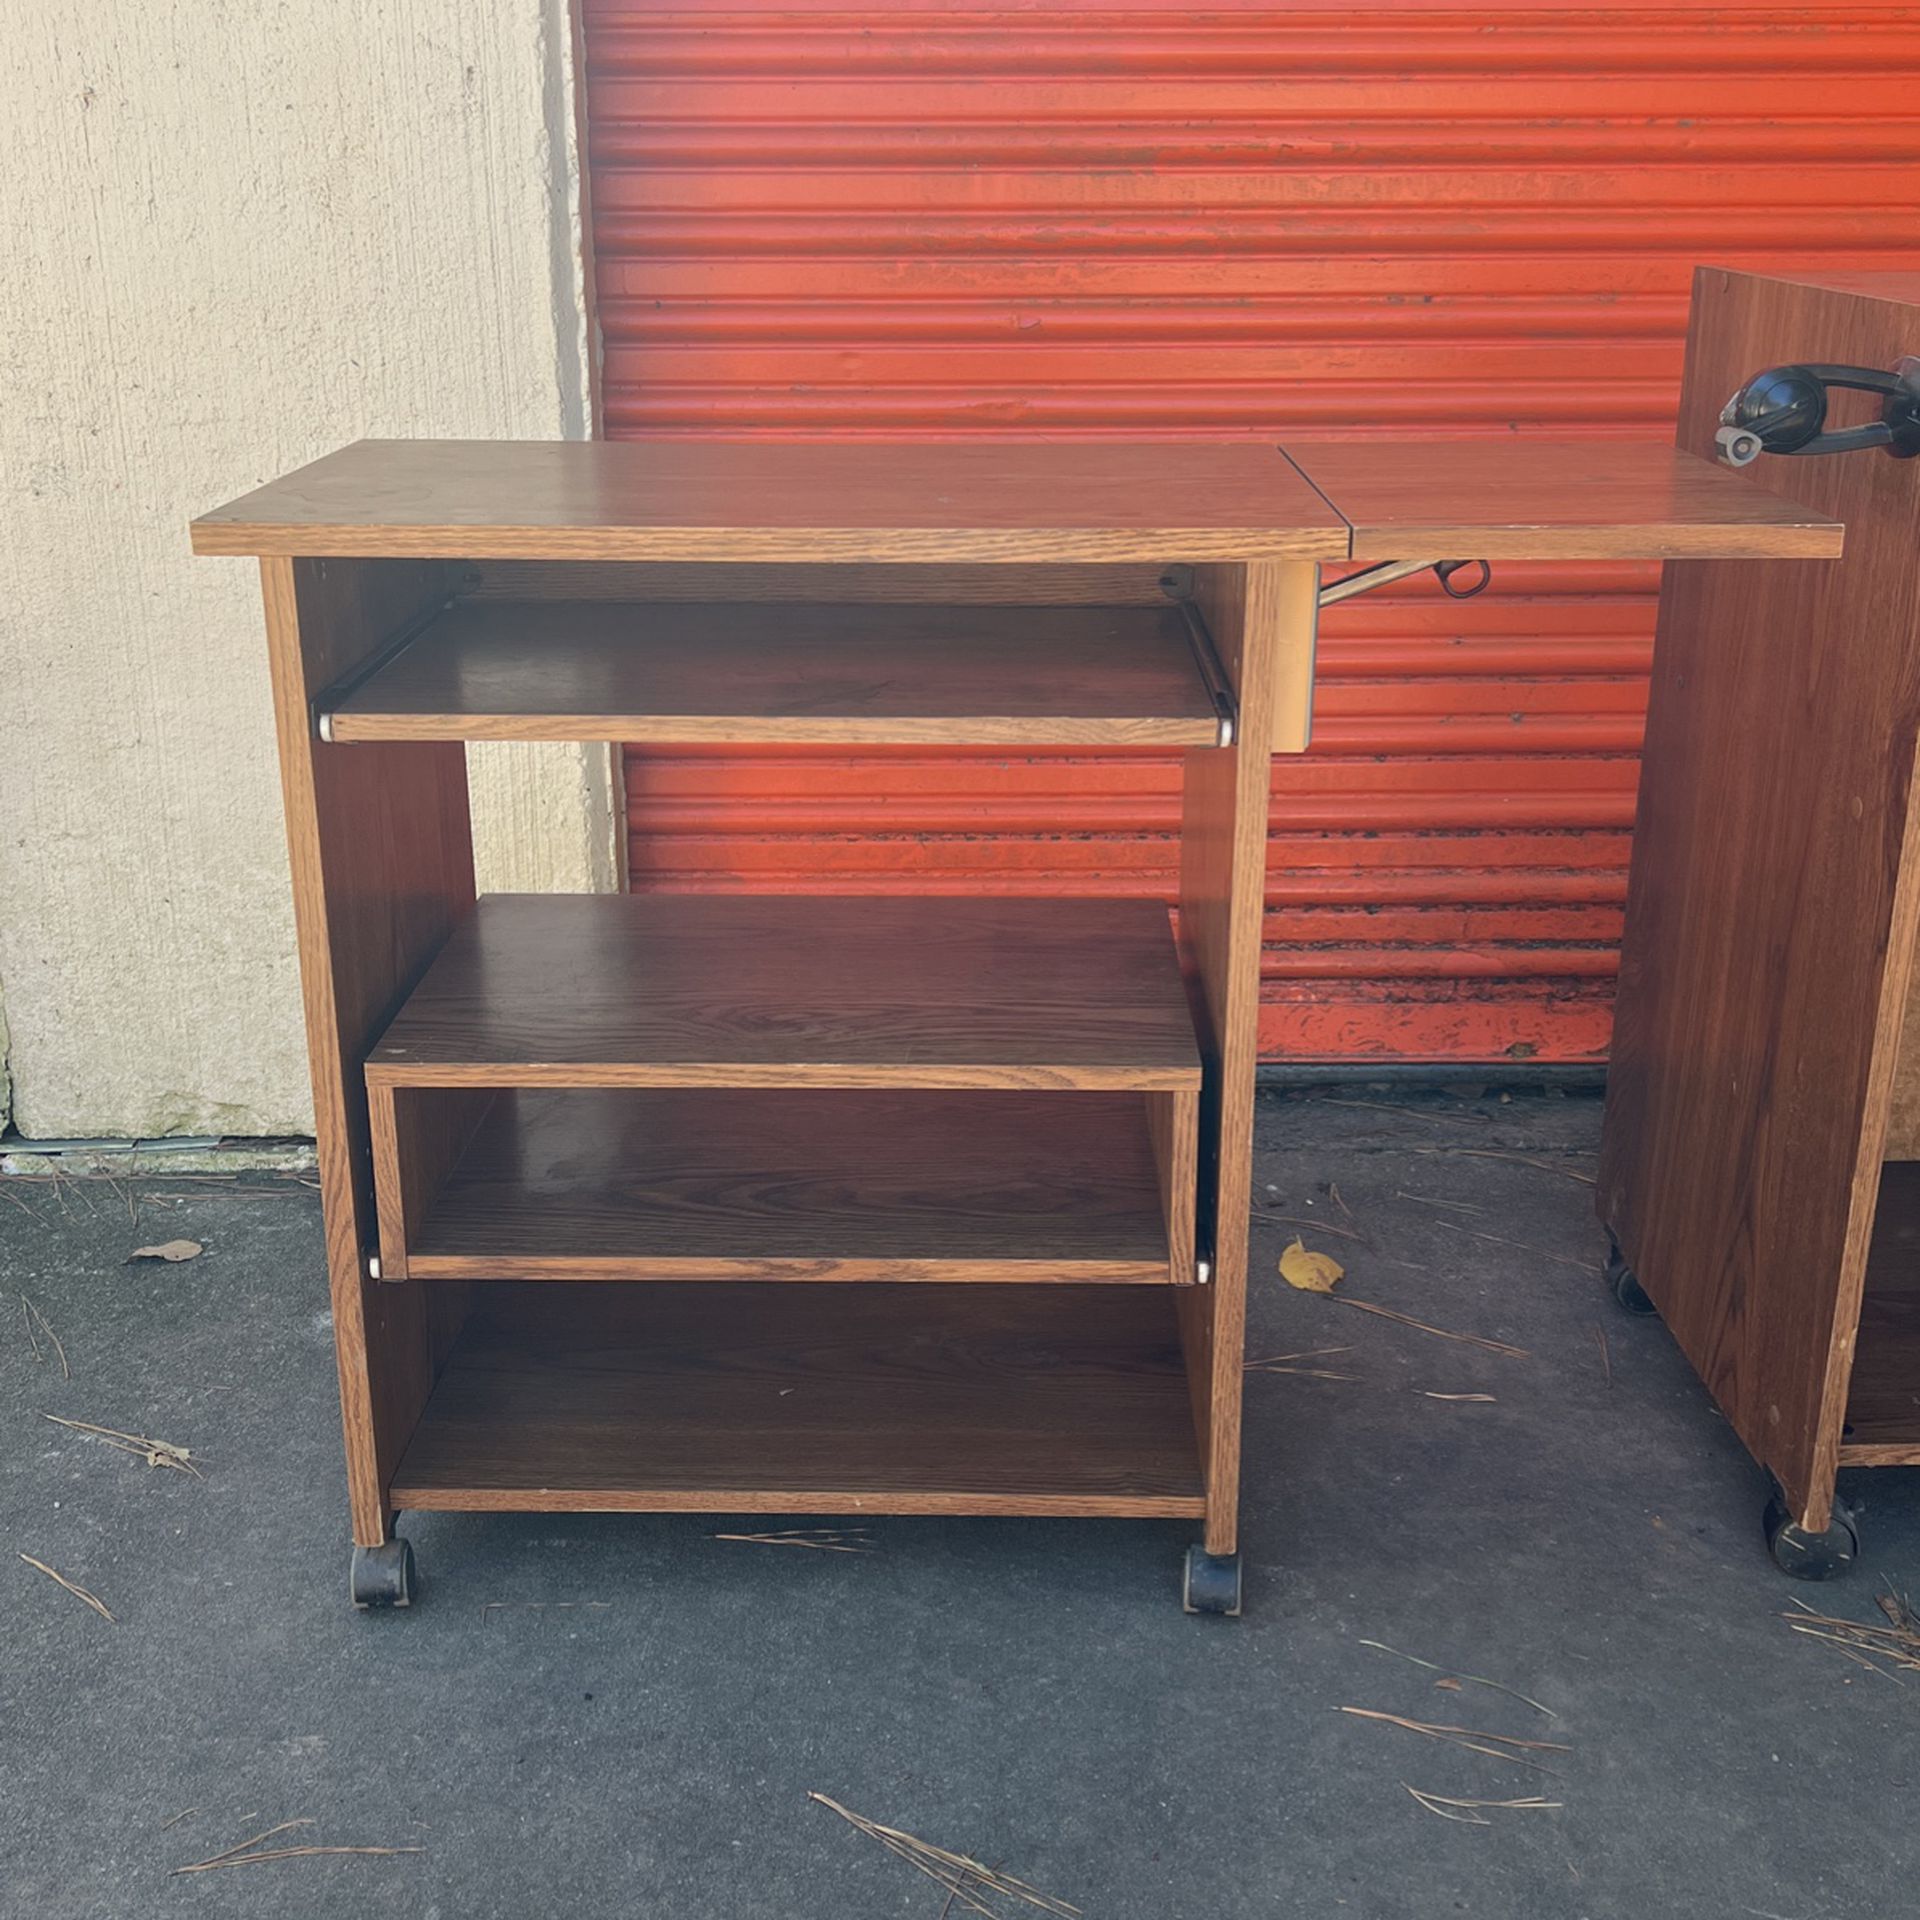 Small Set of Rolling Shelves